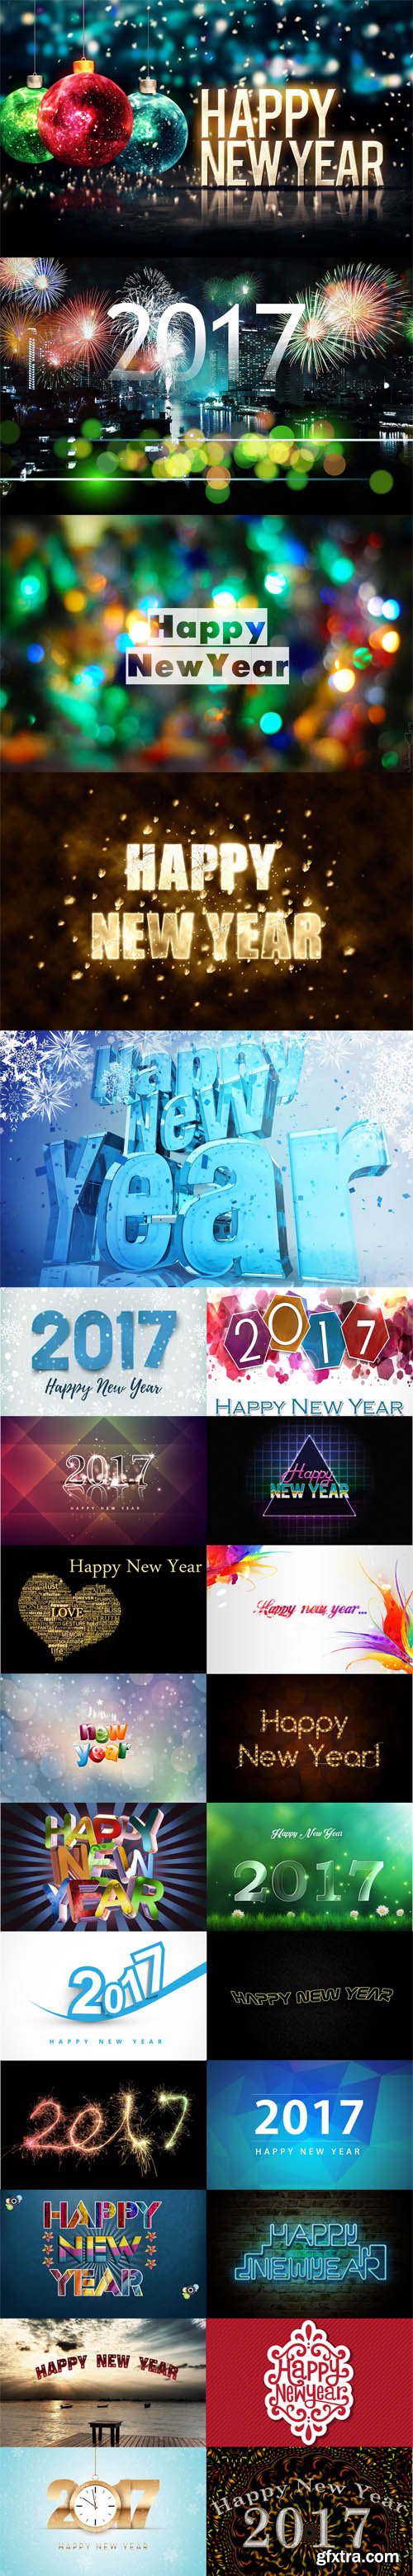 Premium 2017 Happy New Year Wallpapers [25 Pictures]